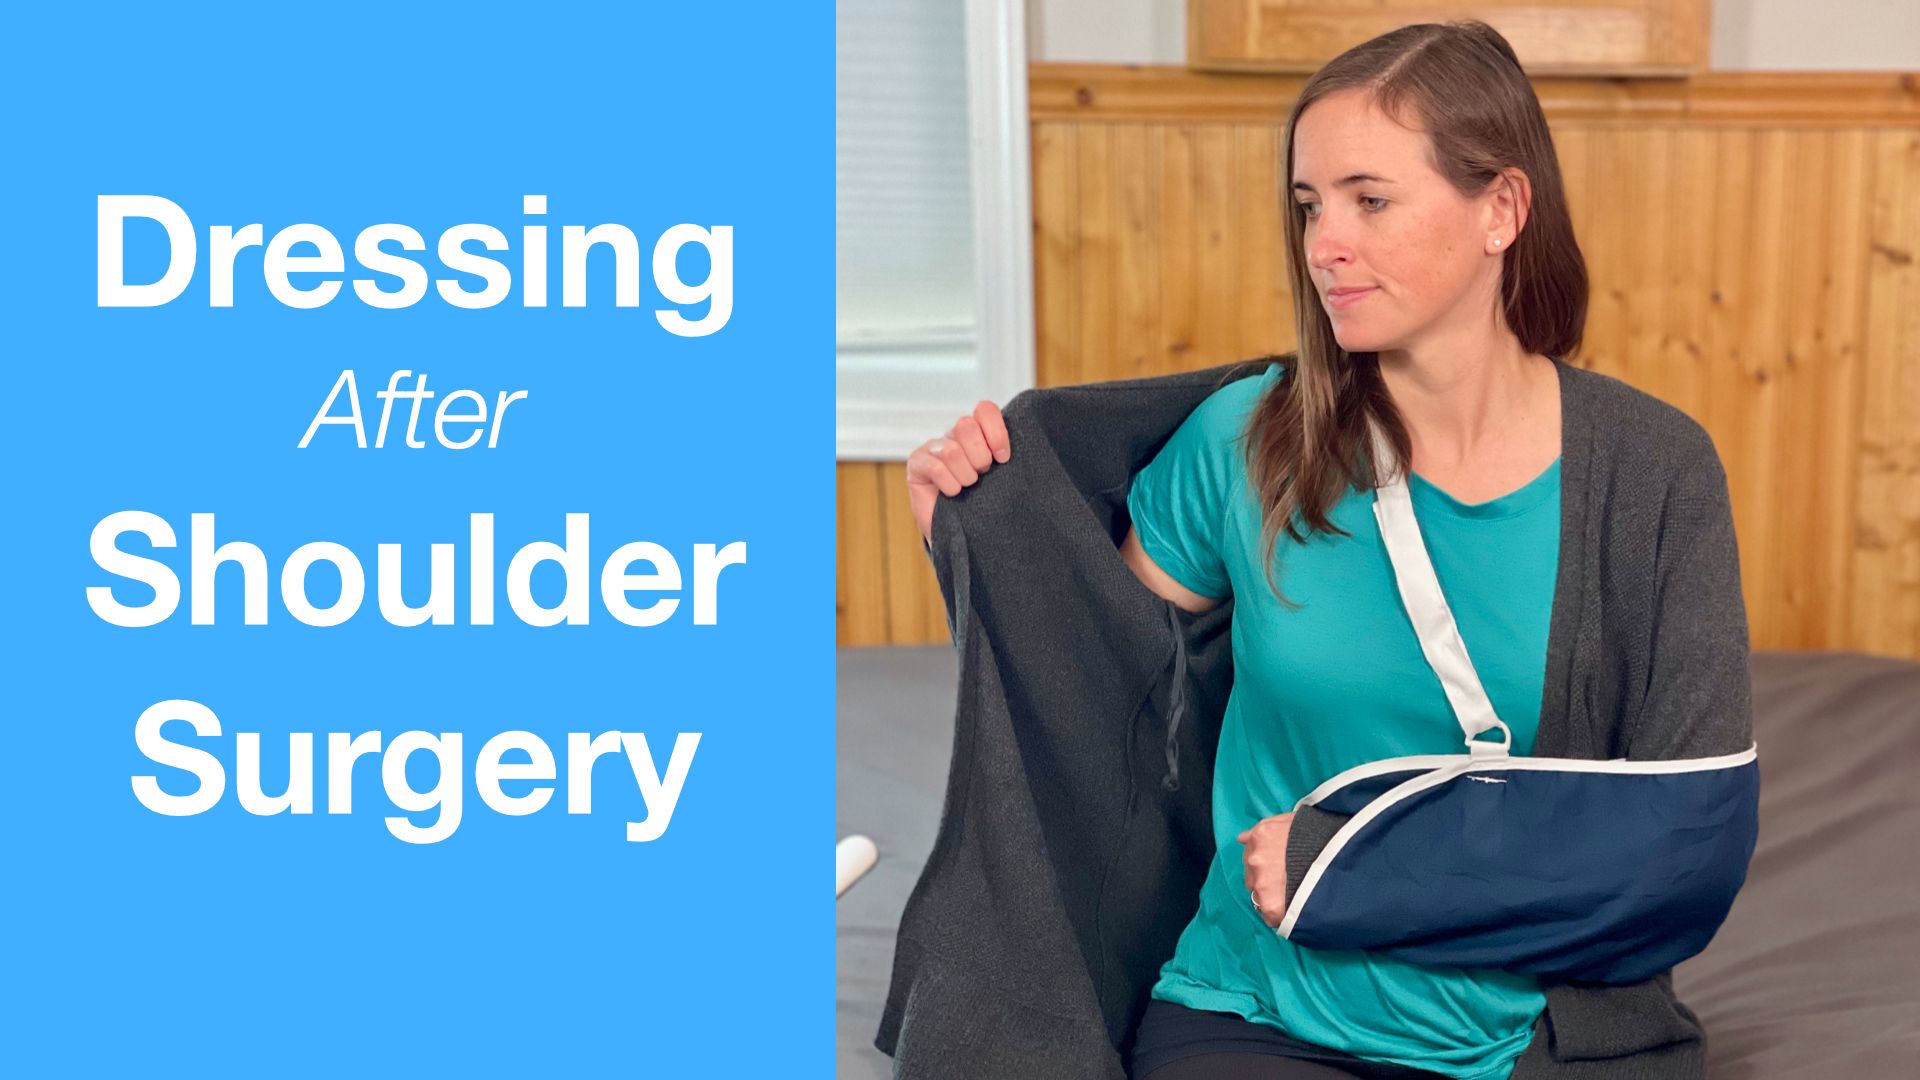 How to Get Dressed and Undressed After Shoulder Surgery or Injury